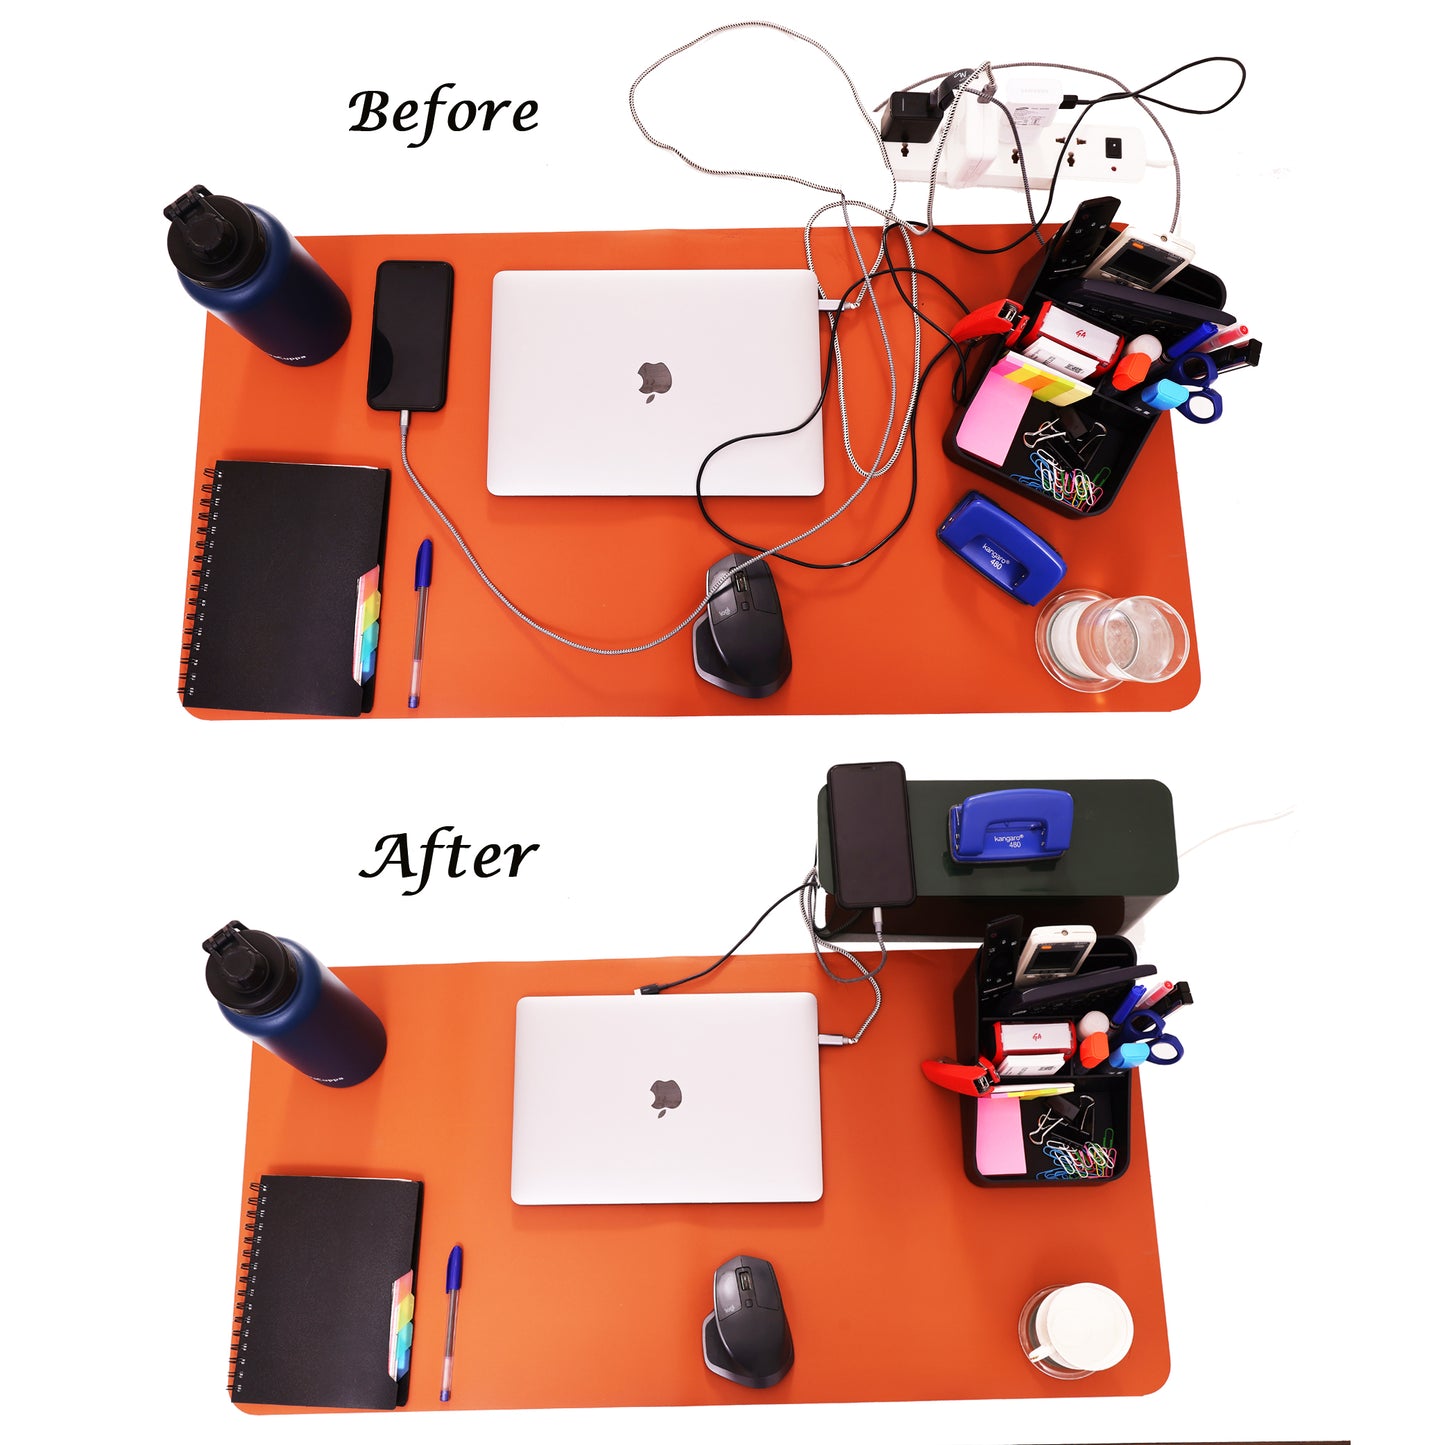 Tidy Up! Side Kick – Desk, Bed Side, Stationery, Home, Office, Study Table Organizer